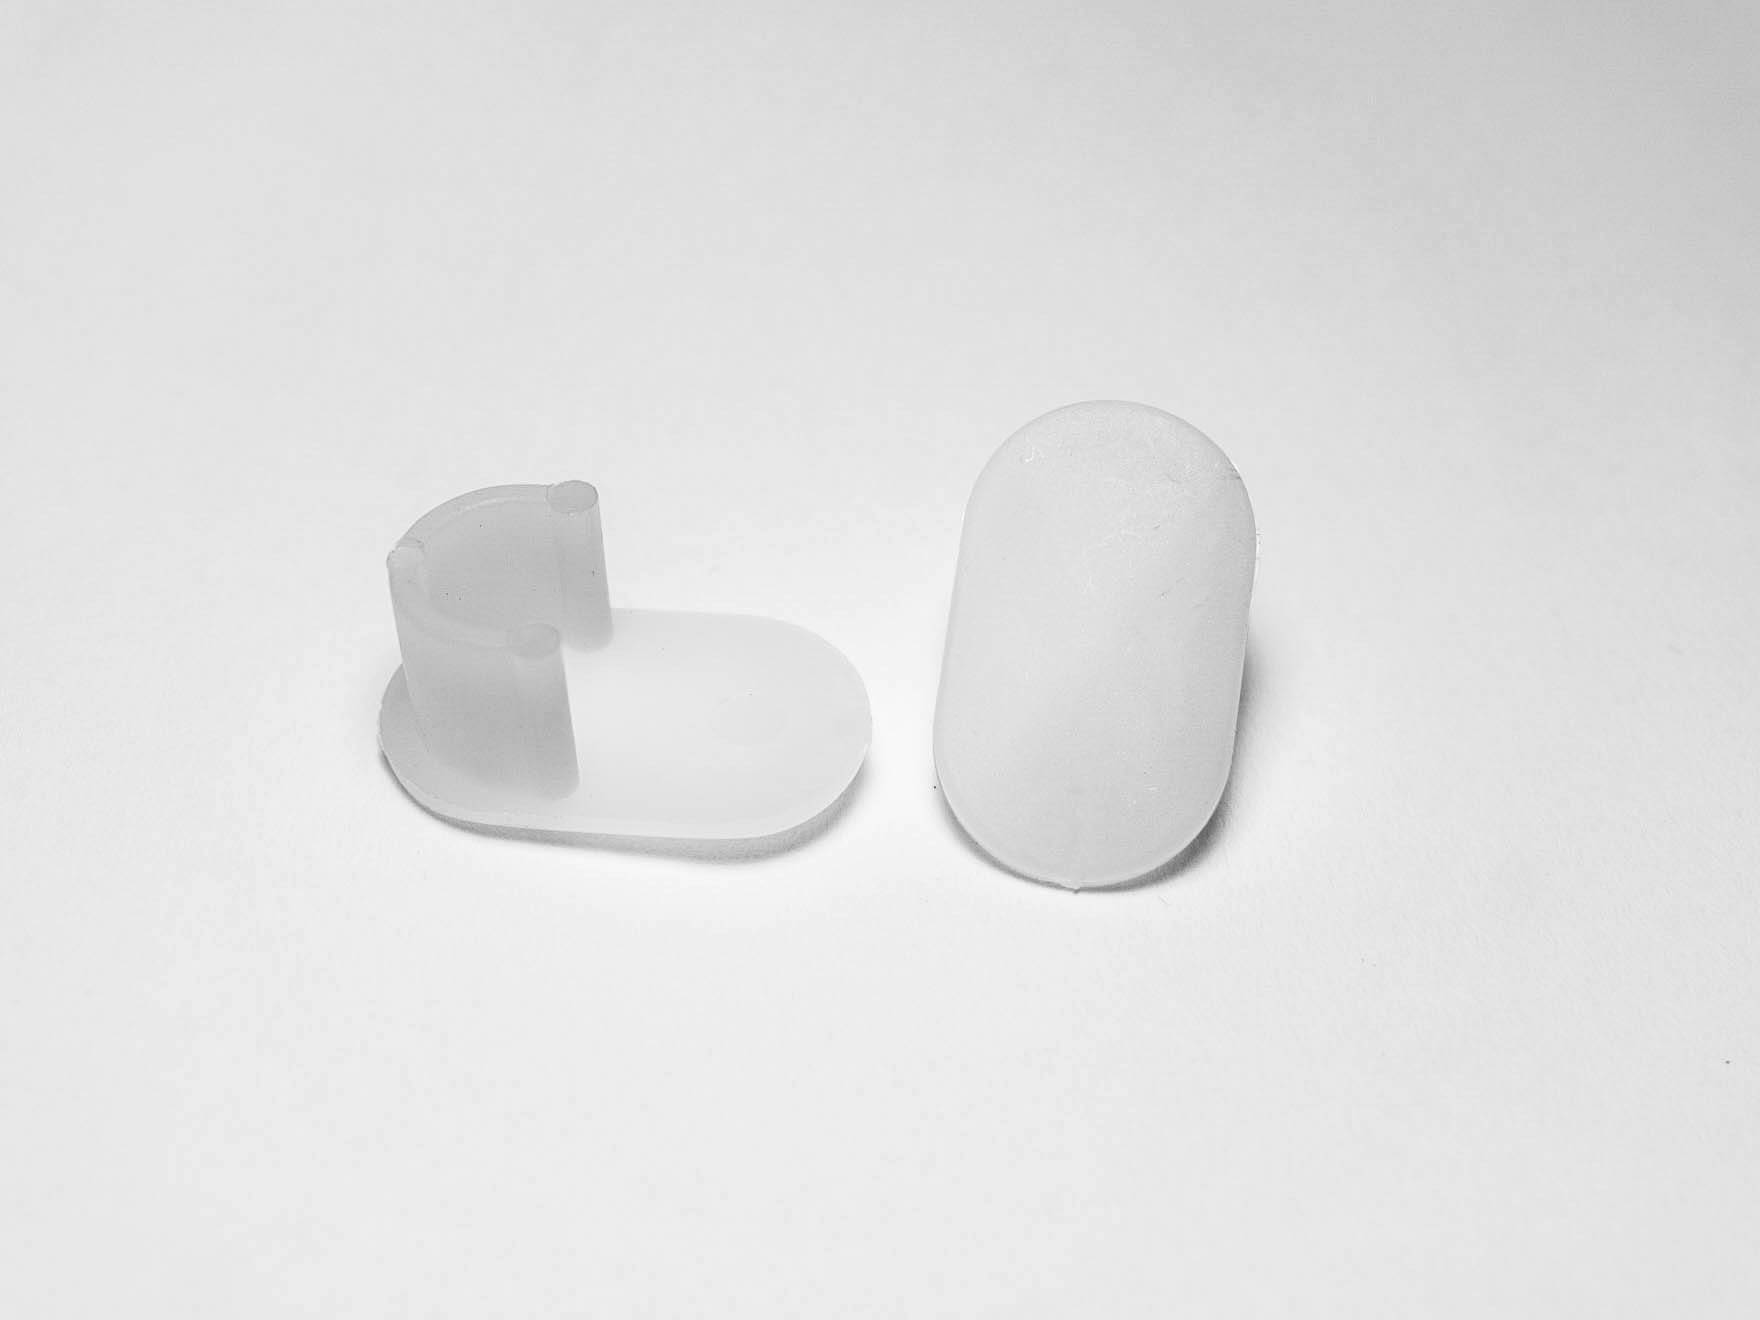 8 Oval Patio Sling Inserts 1-1/4'' Length x 3/4'' Width